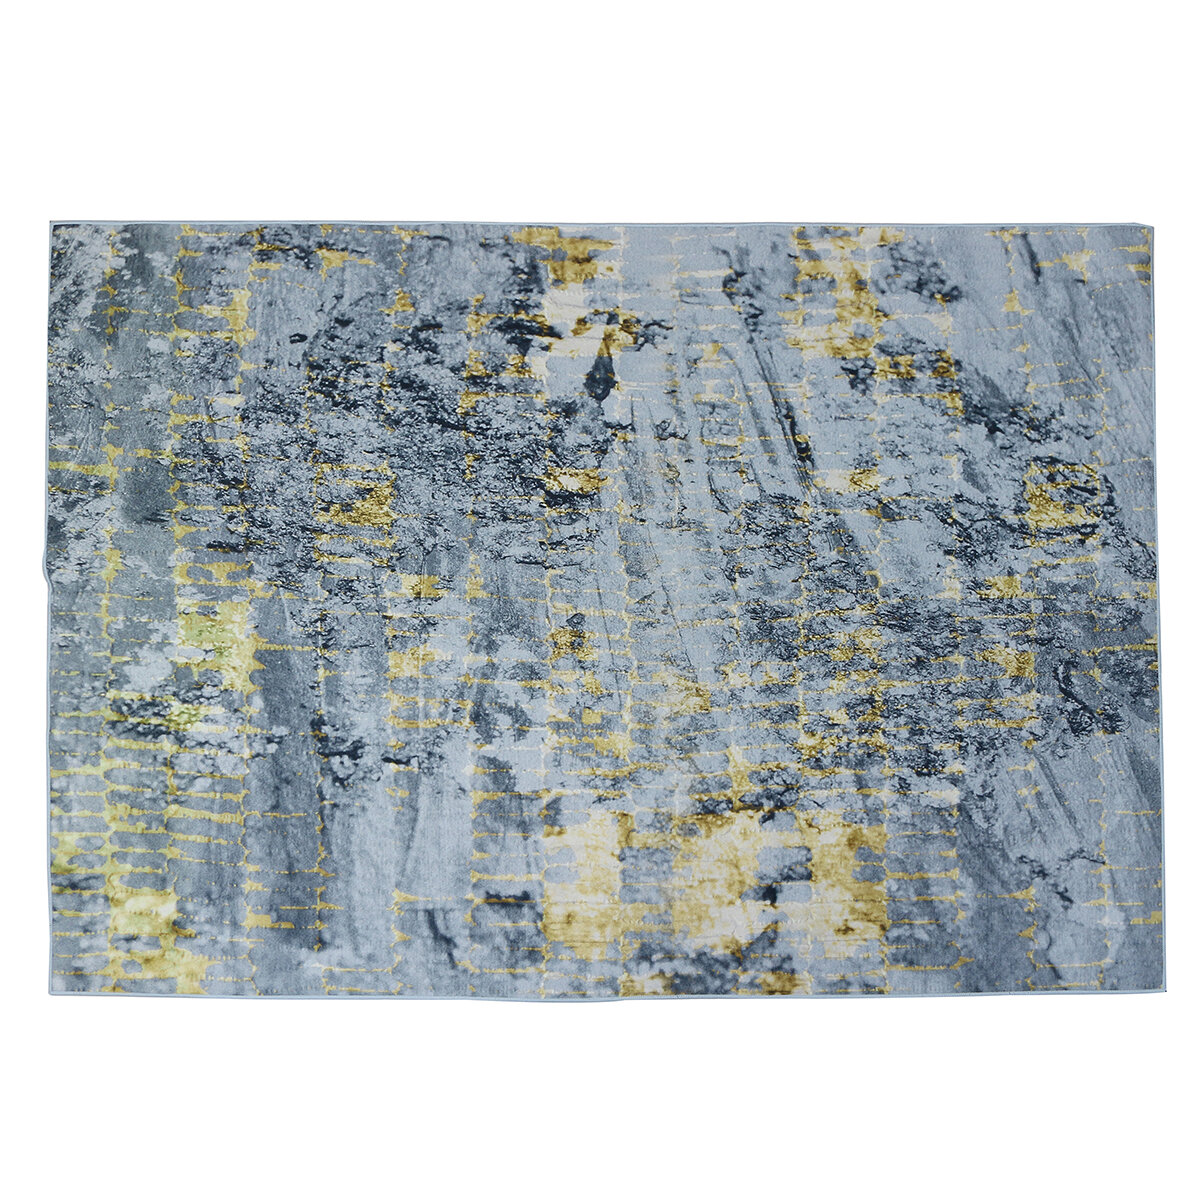 

Large Yellow Grey Abstract Small Extra Large Floor Carpet Area Rugs Mats for Living-room Bedroom